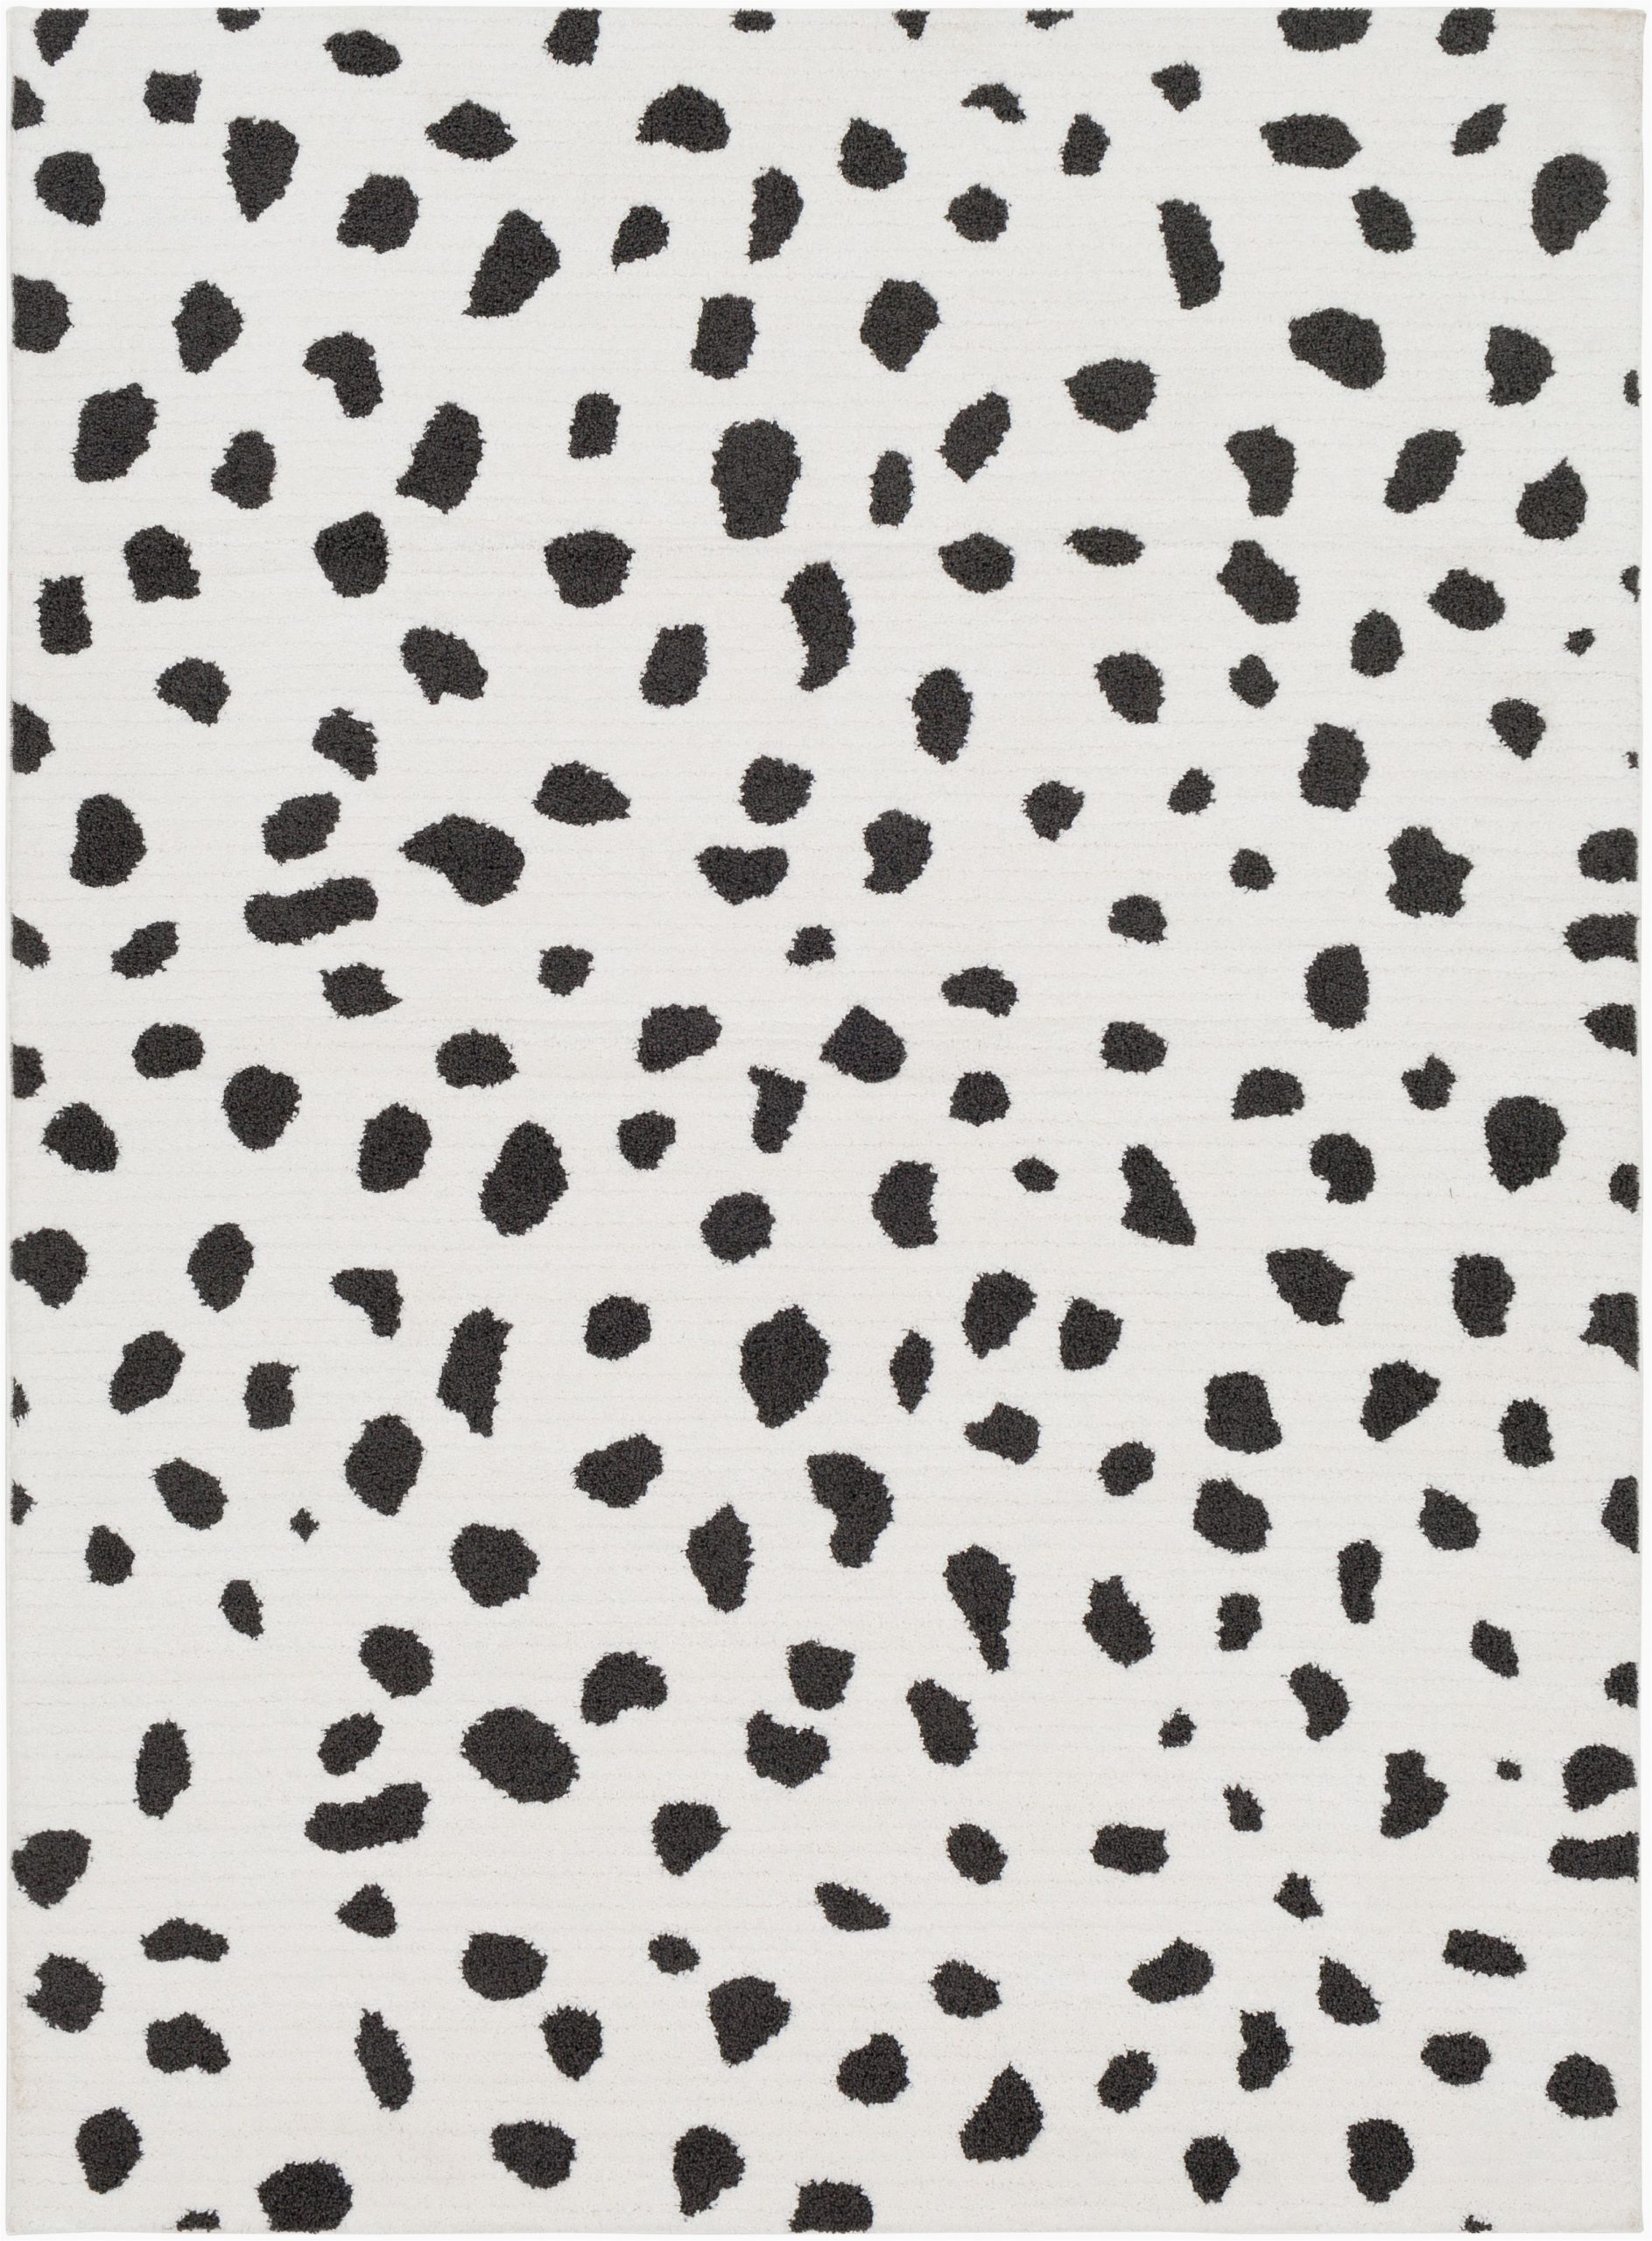 Black and White Polka Dot area Rug Home Accents Moroccan Shag 2 X 3 Rug Black White In 2020